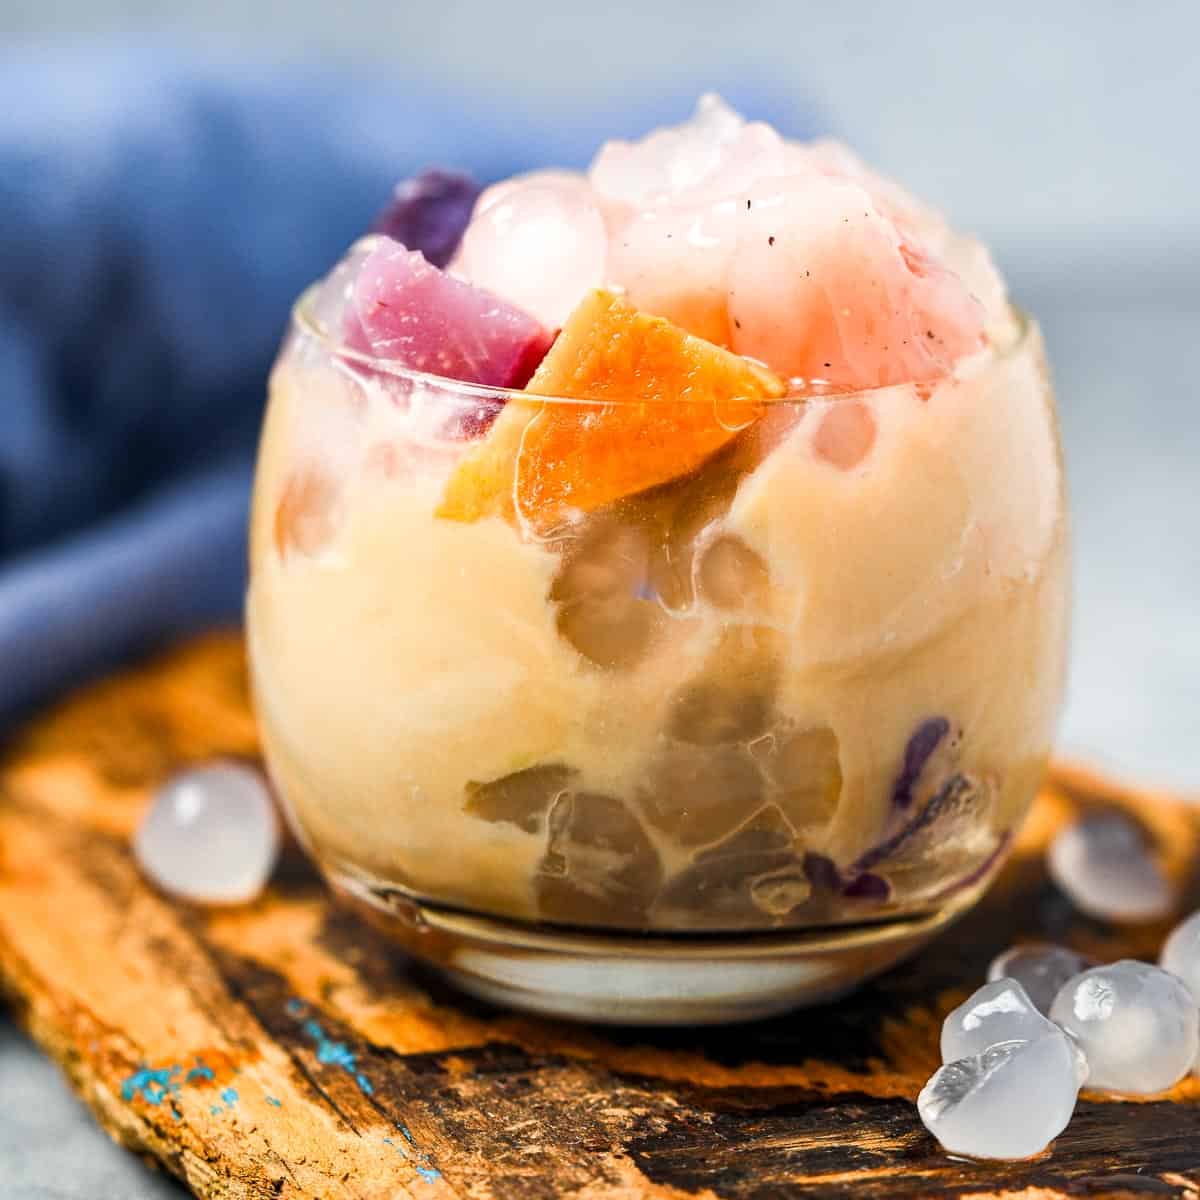 A glass filled with buber cha cha containing a variety of tapioca jellies, steamed root vegetables, and coconut porridge.